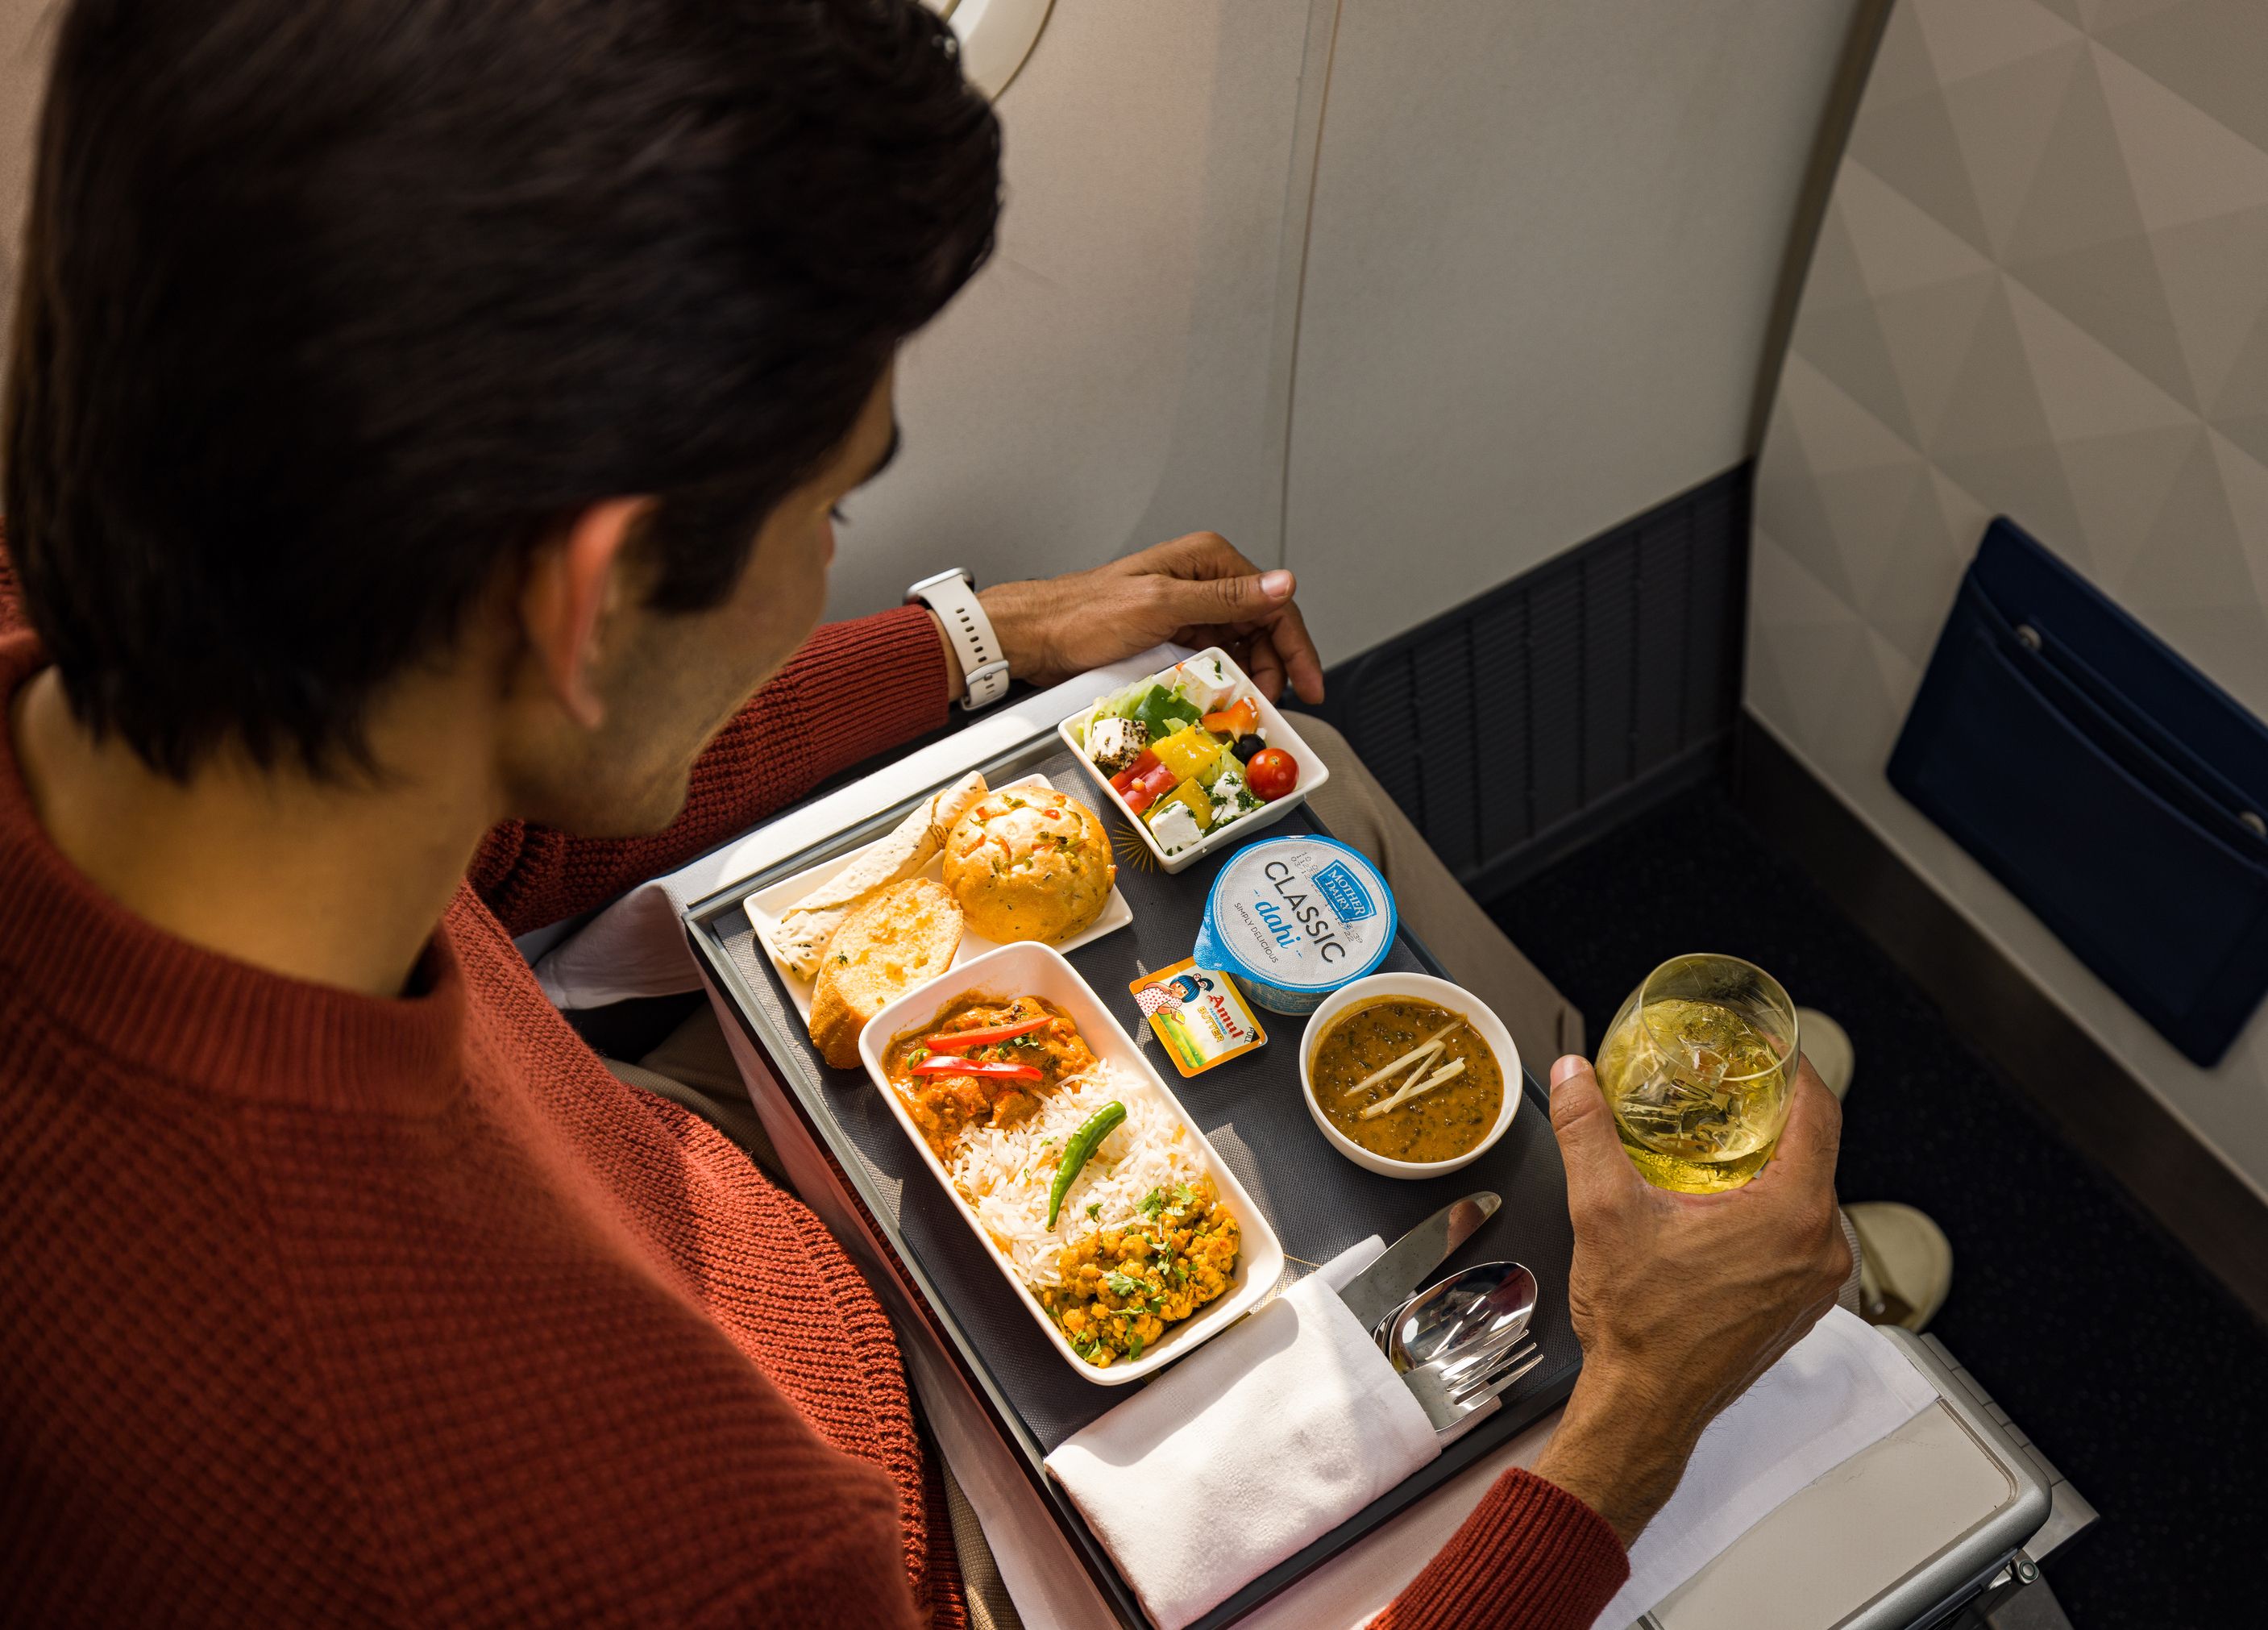 Air India new meals for international flights.